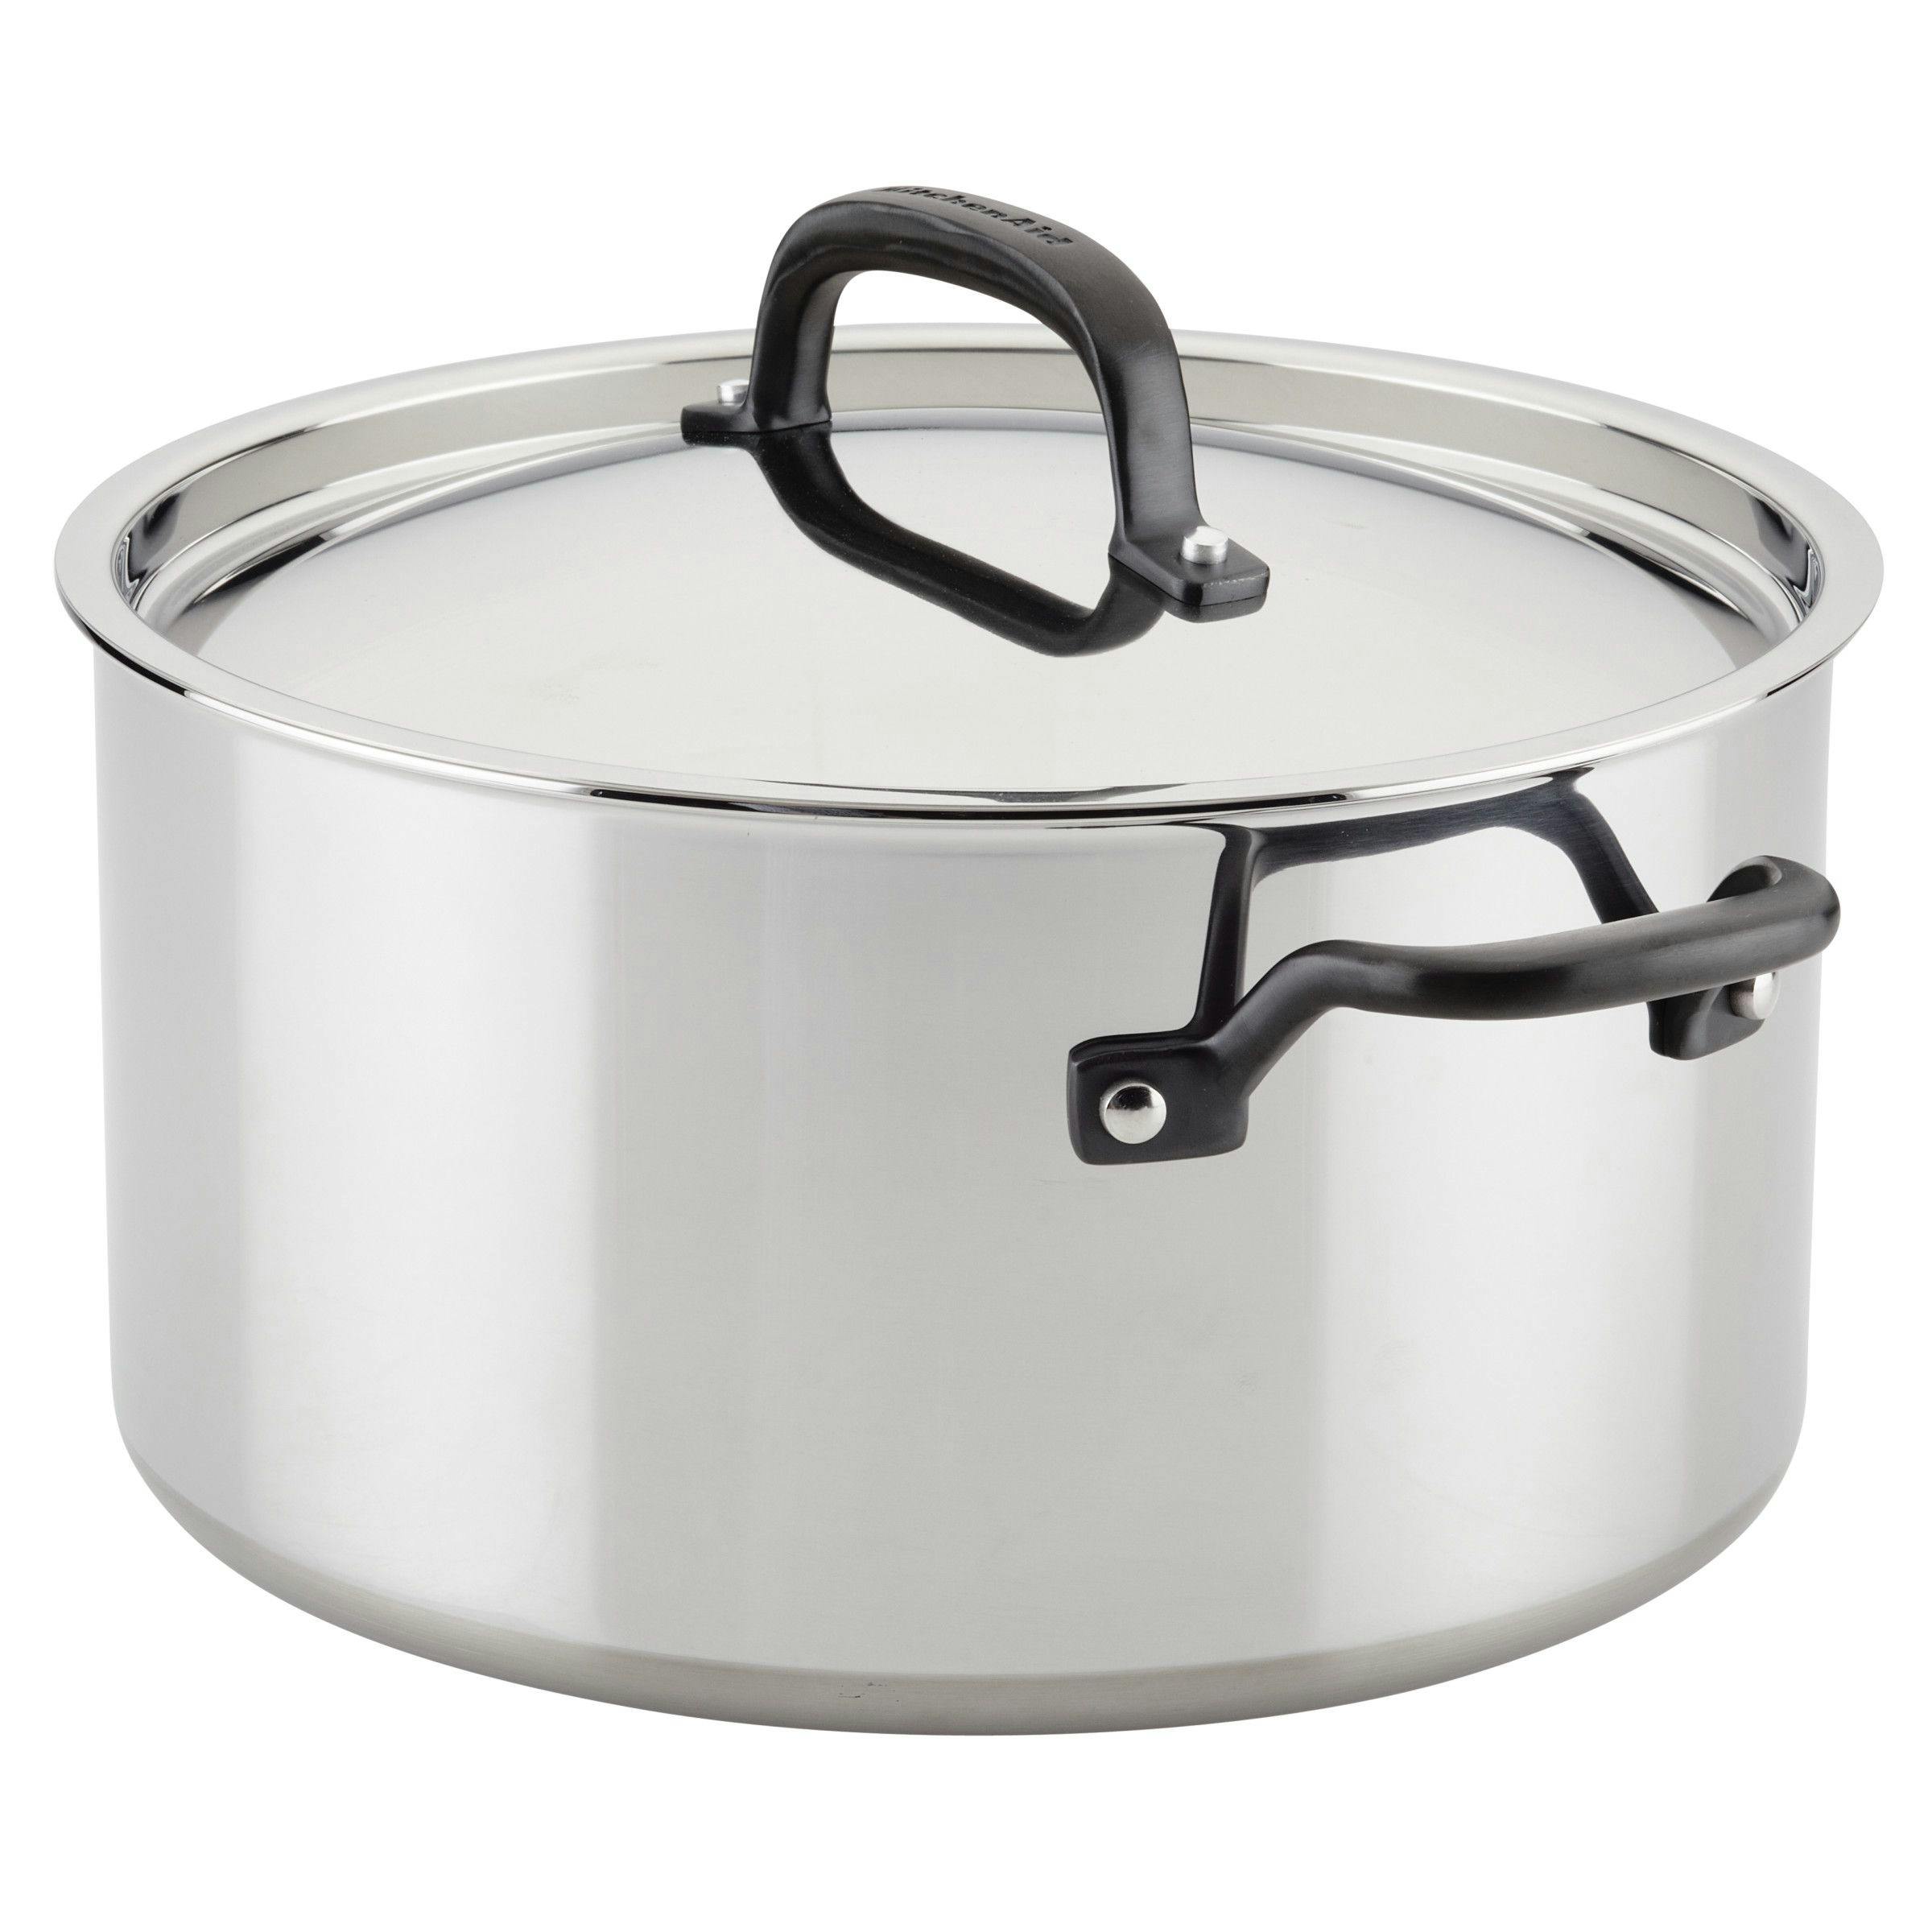 KitchenAid 5-Ply Clad Stainless Steel Cookware Induction Pots and Pans Set, 10-Piece, Polished Stainless Steel